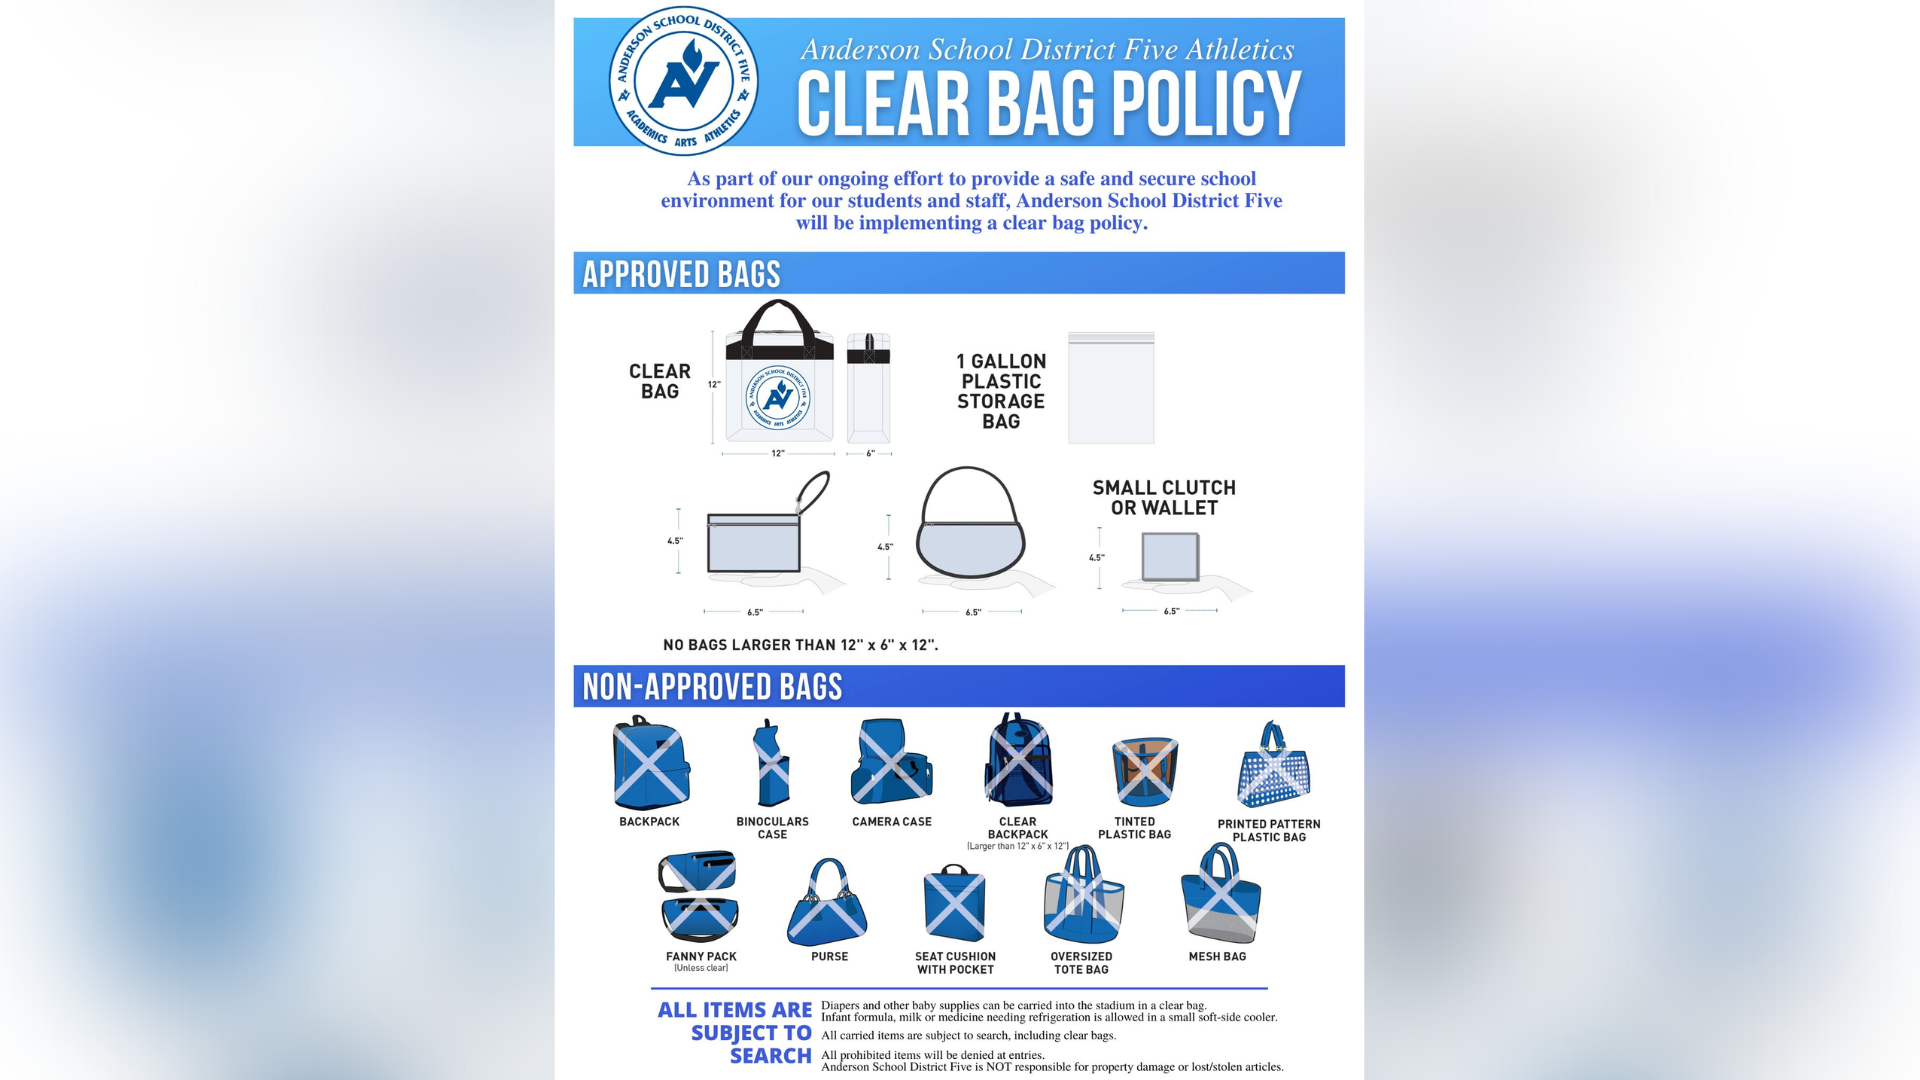 Anderson School District 5 implements clear bag policy for athletic events